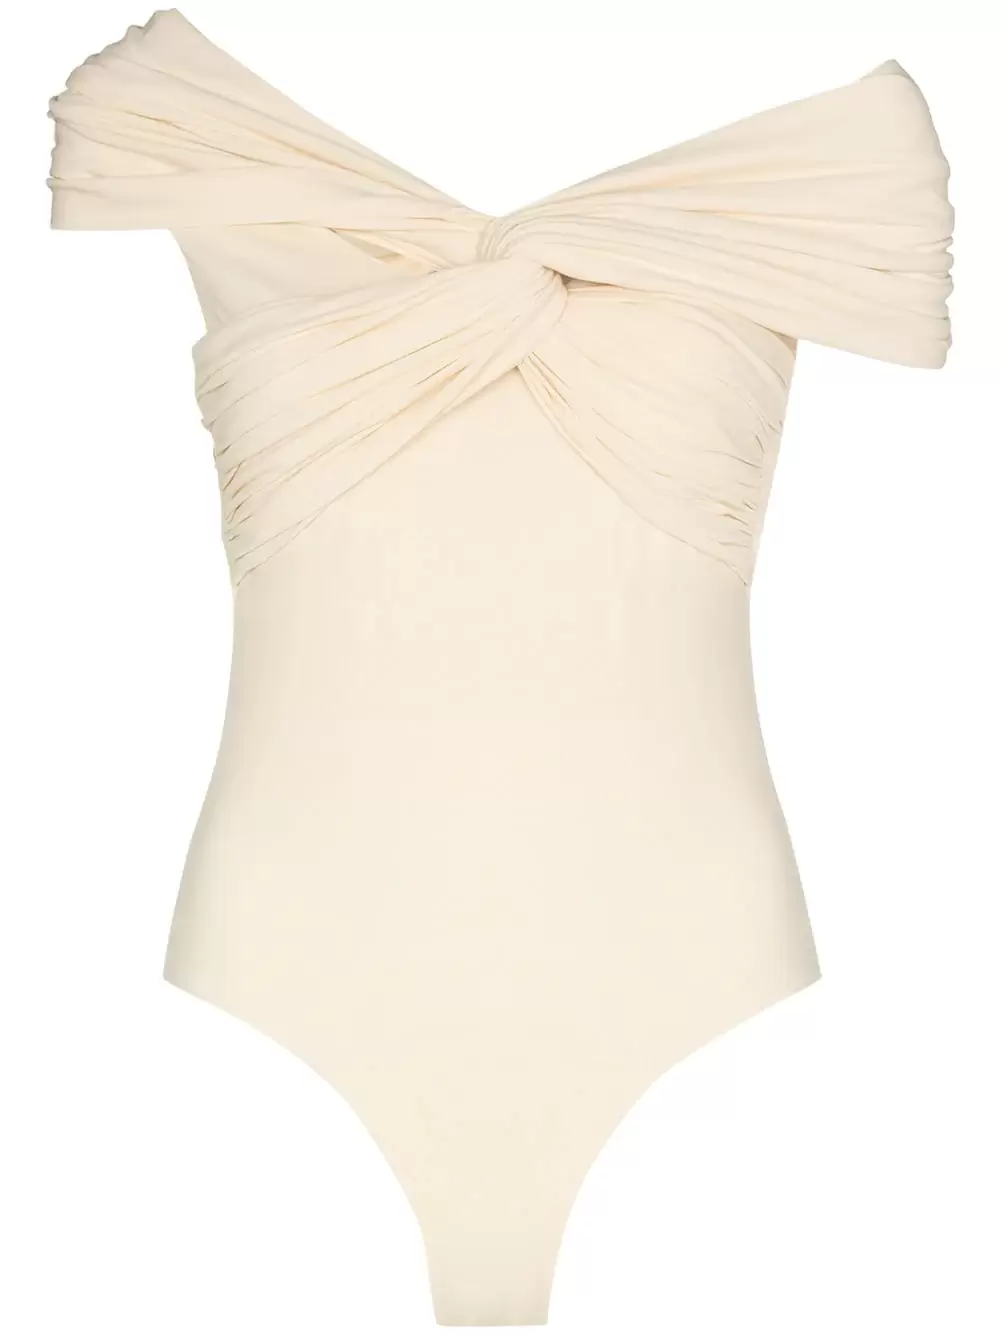 Khaite ‘Cerise’ off-the-shoulder knotted stretch-cotton jersey bodysuit in cream